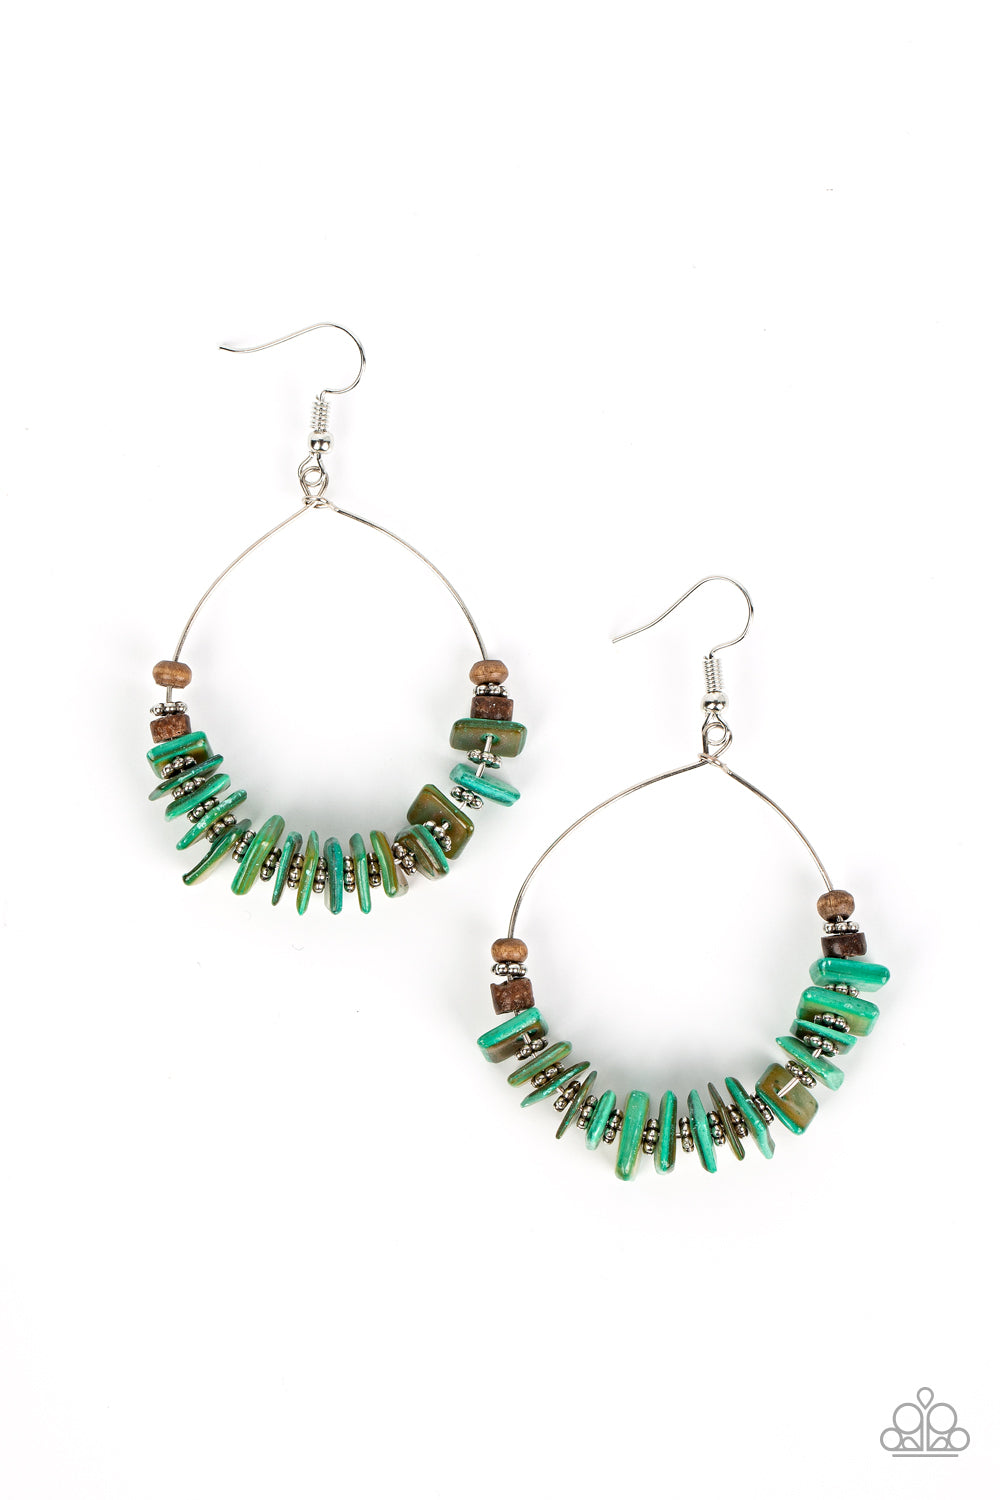 Hawaiian Kiss - Green and Silver Earrings - Paparazzi Accessories - Infused with earthy wooden accents, studded silver rings and pieces of green shell-like pebbles alternate along a dainty wire hoop for a tropical inspiration. Earring attaches to a standard fishhook fitting. Sold as one pair of earrings.